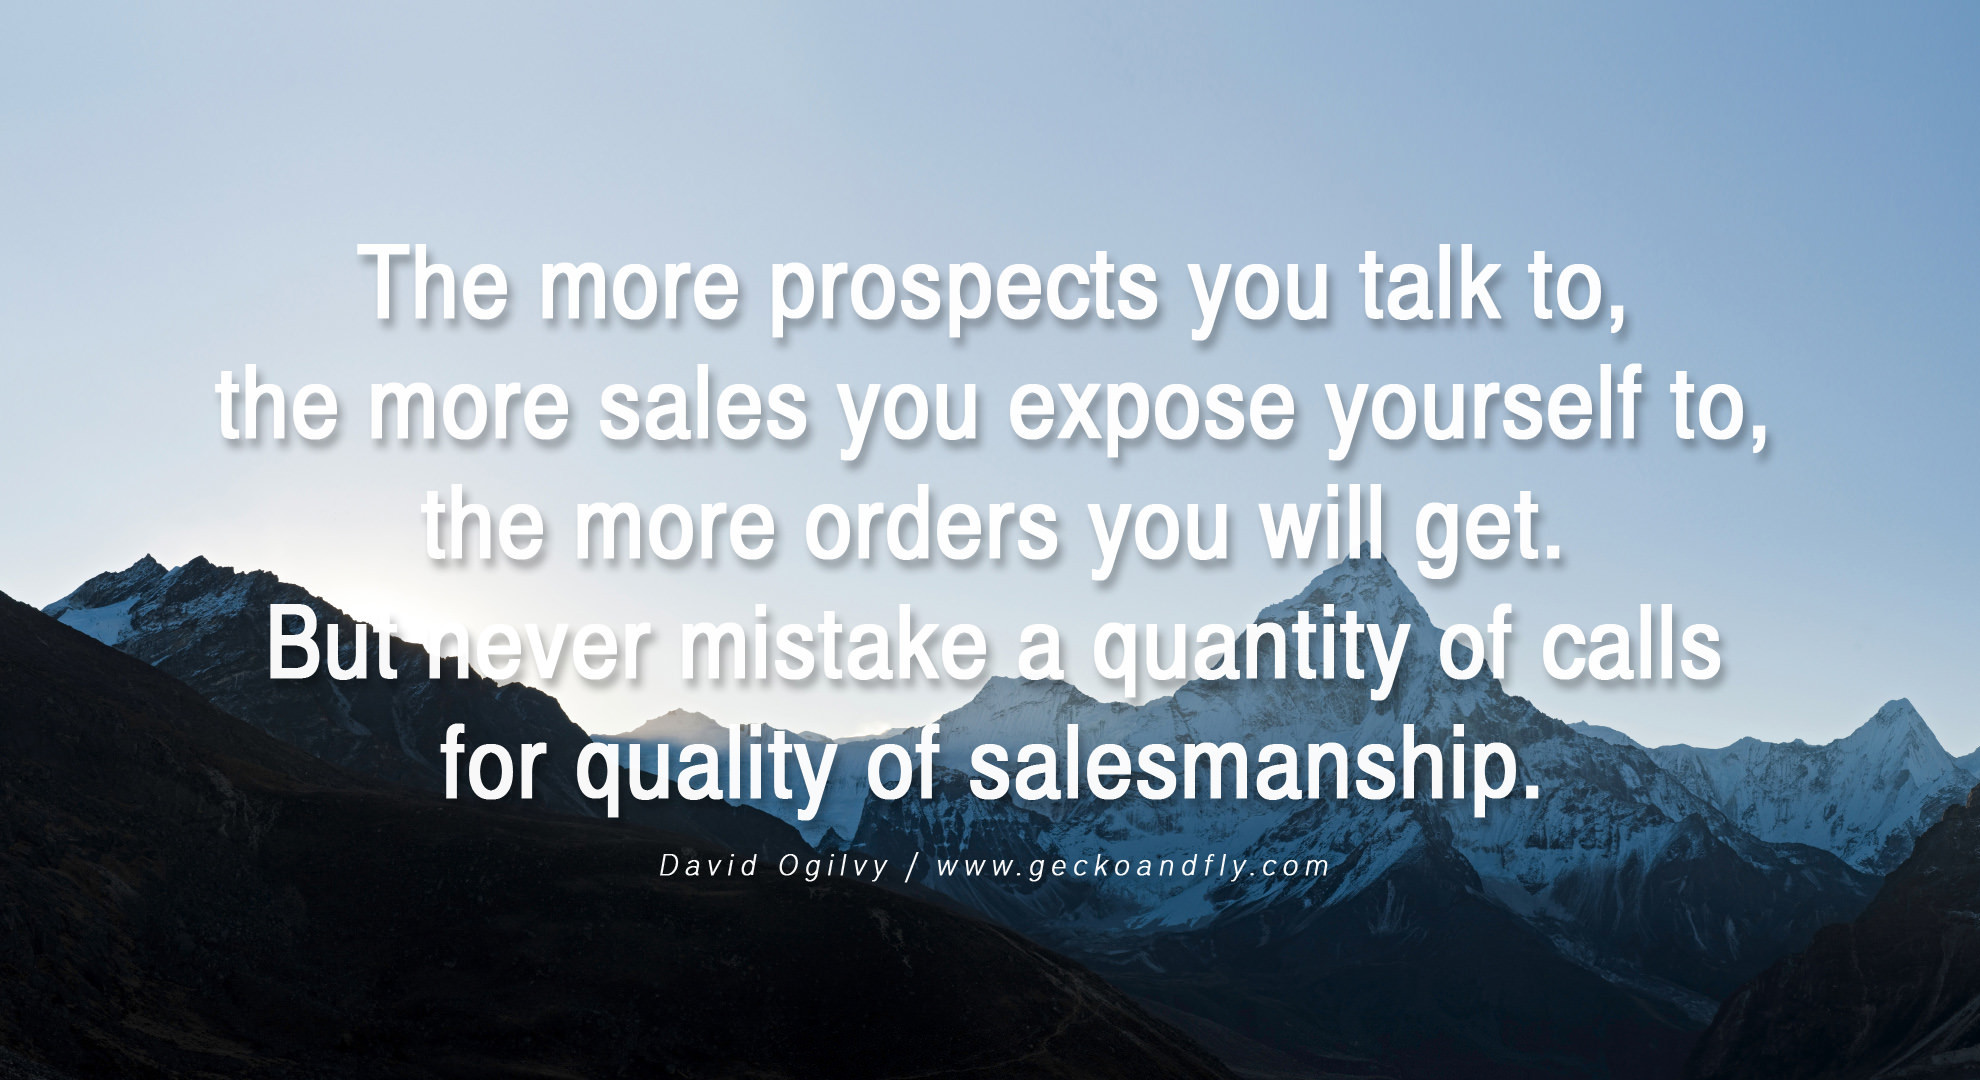 Motivational Quotes For Salespeople
 Famous Sales Motivational Quotes QuotesGram